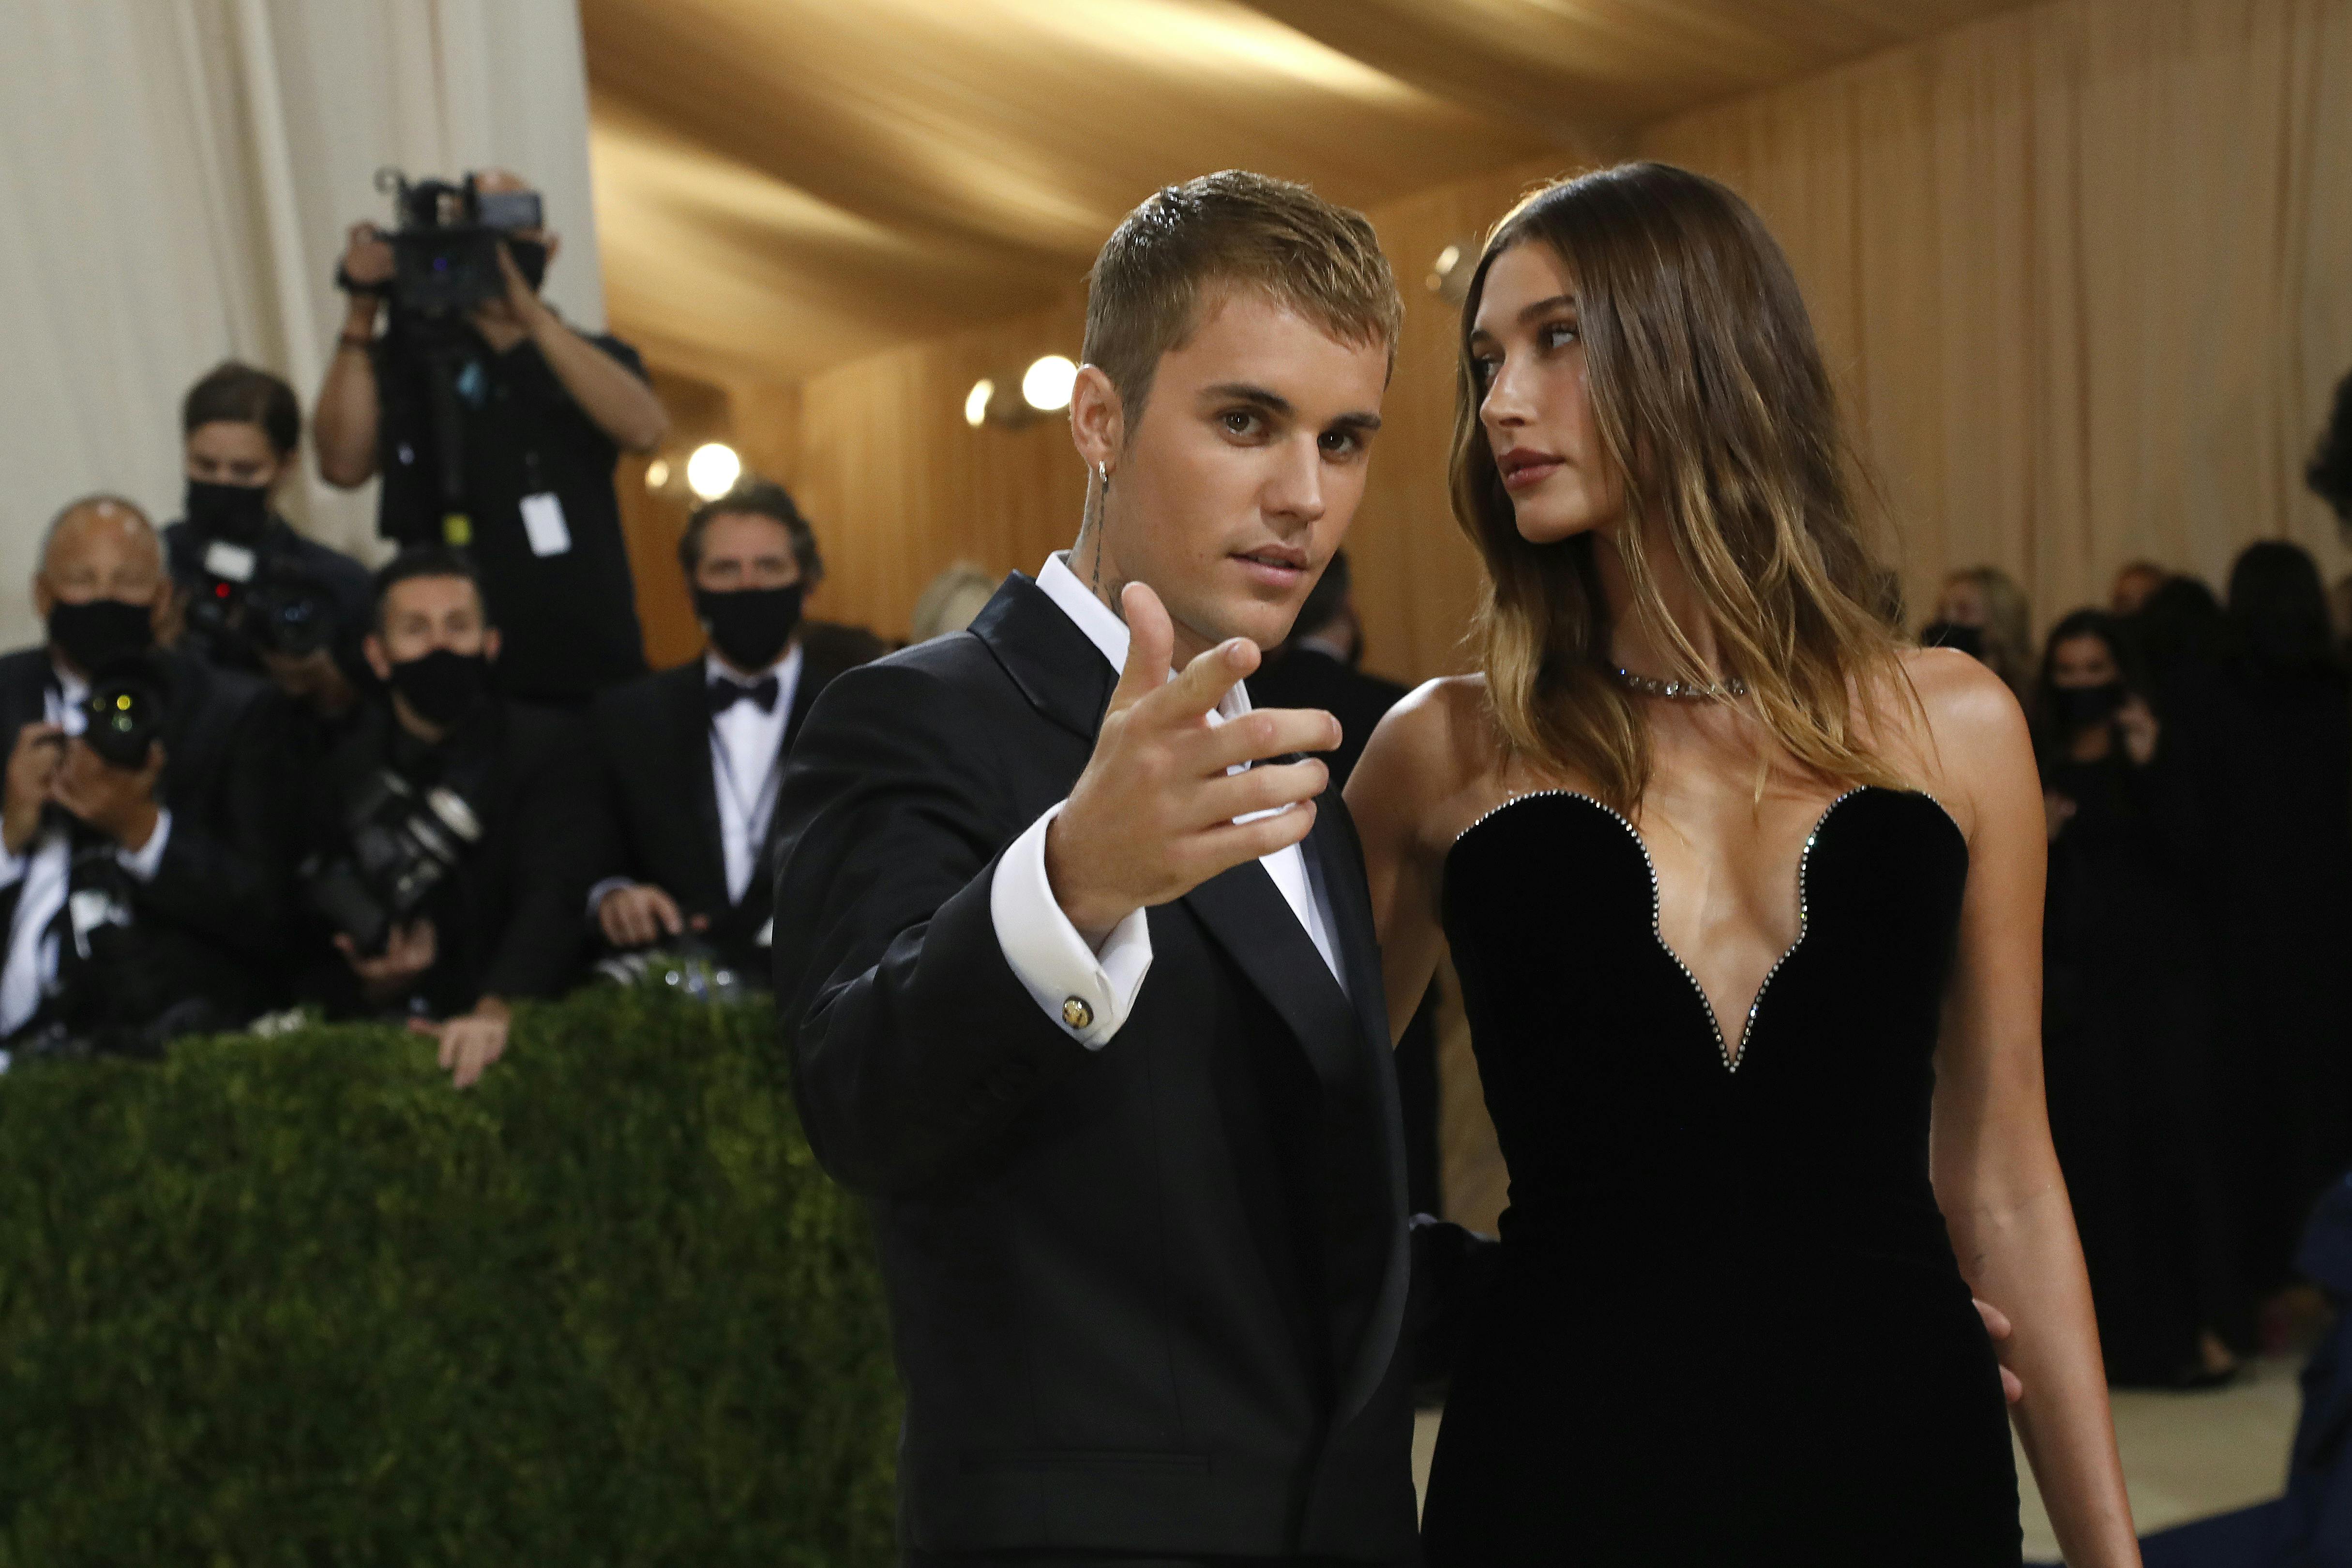 Metropolitan Museum of Art Costume Institute Gala - Met Gala - In America: A Lexicon of Fashion - Arrivals - New York City, U.S. - September 13, 2021. Justin Bieber and Hailey Bieber. REUTERS/Mario Anzuoni